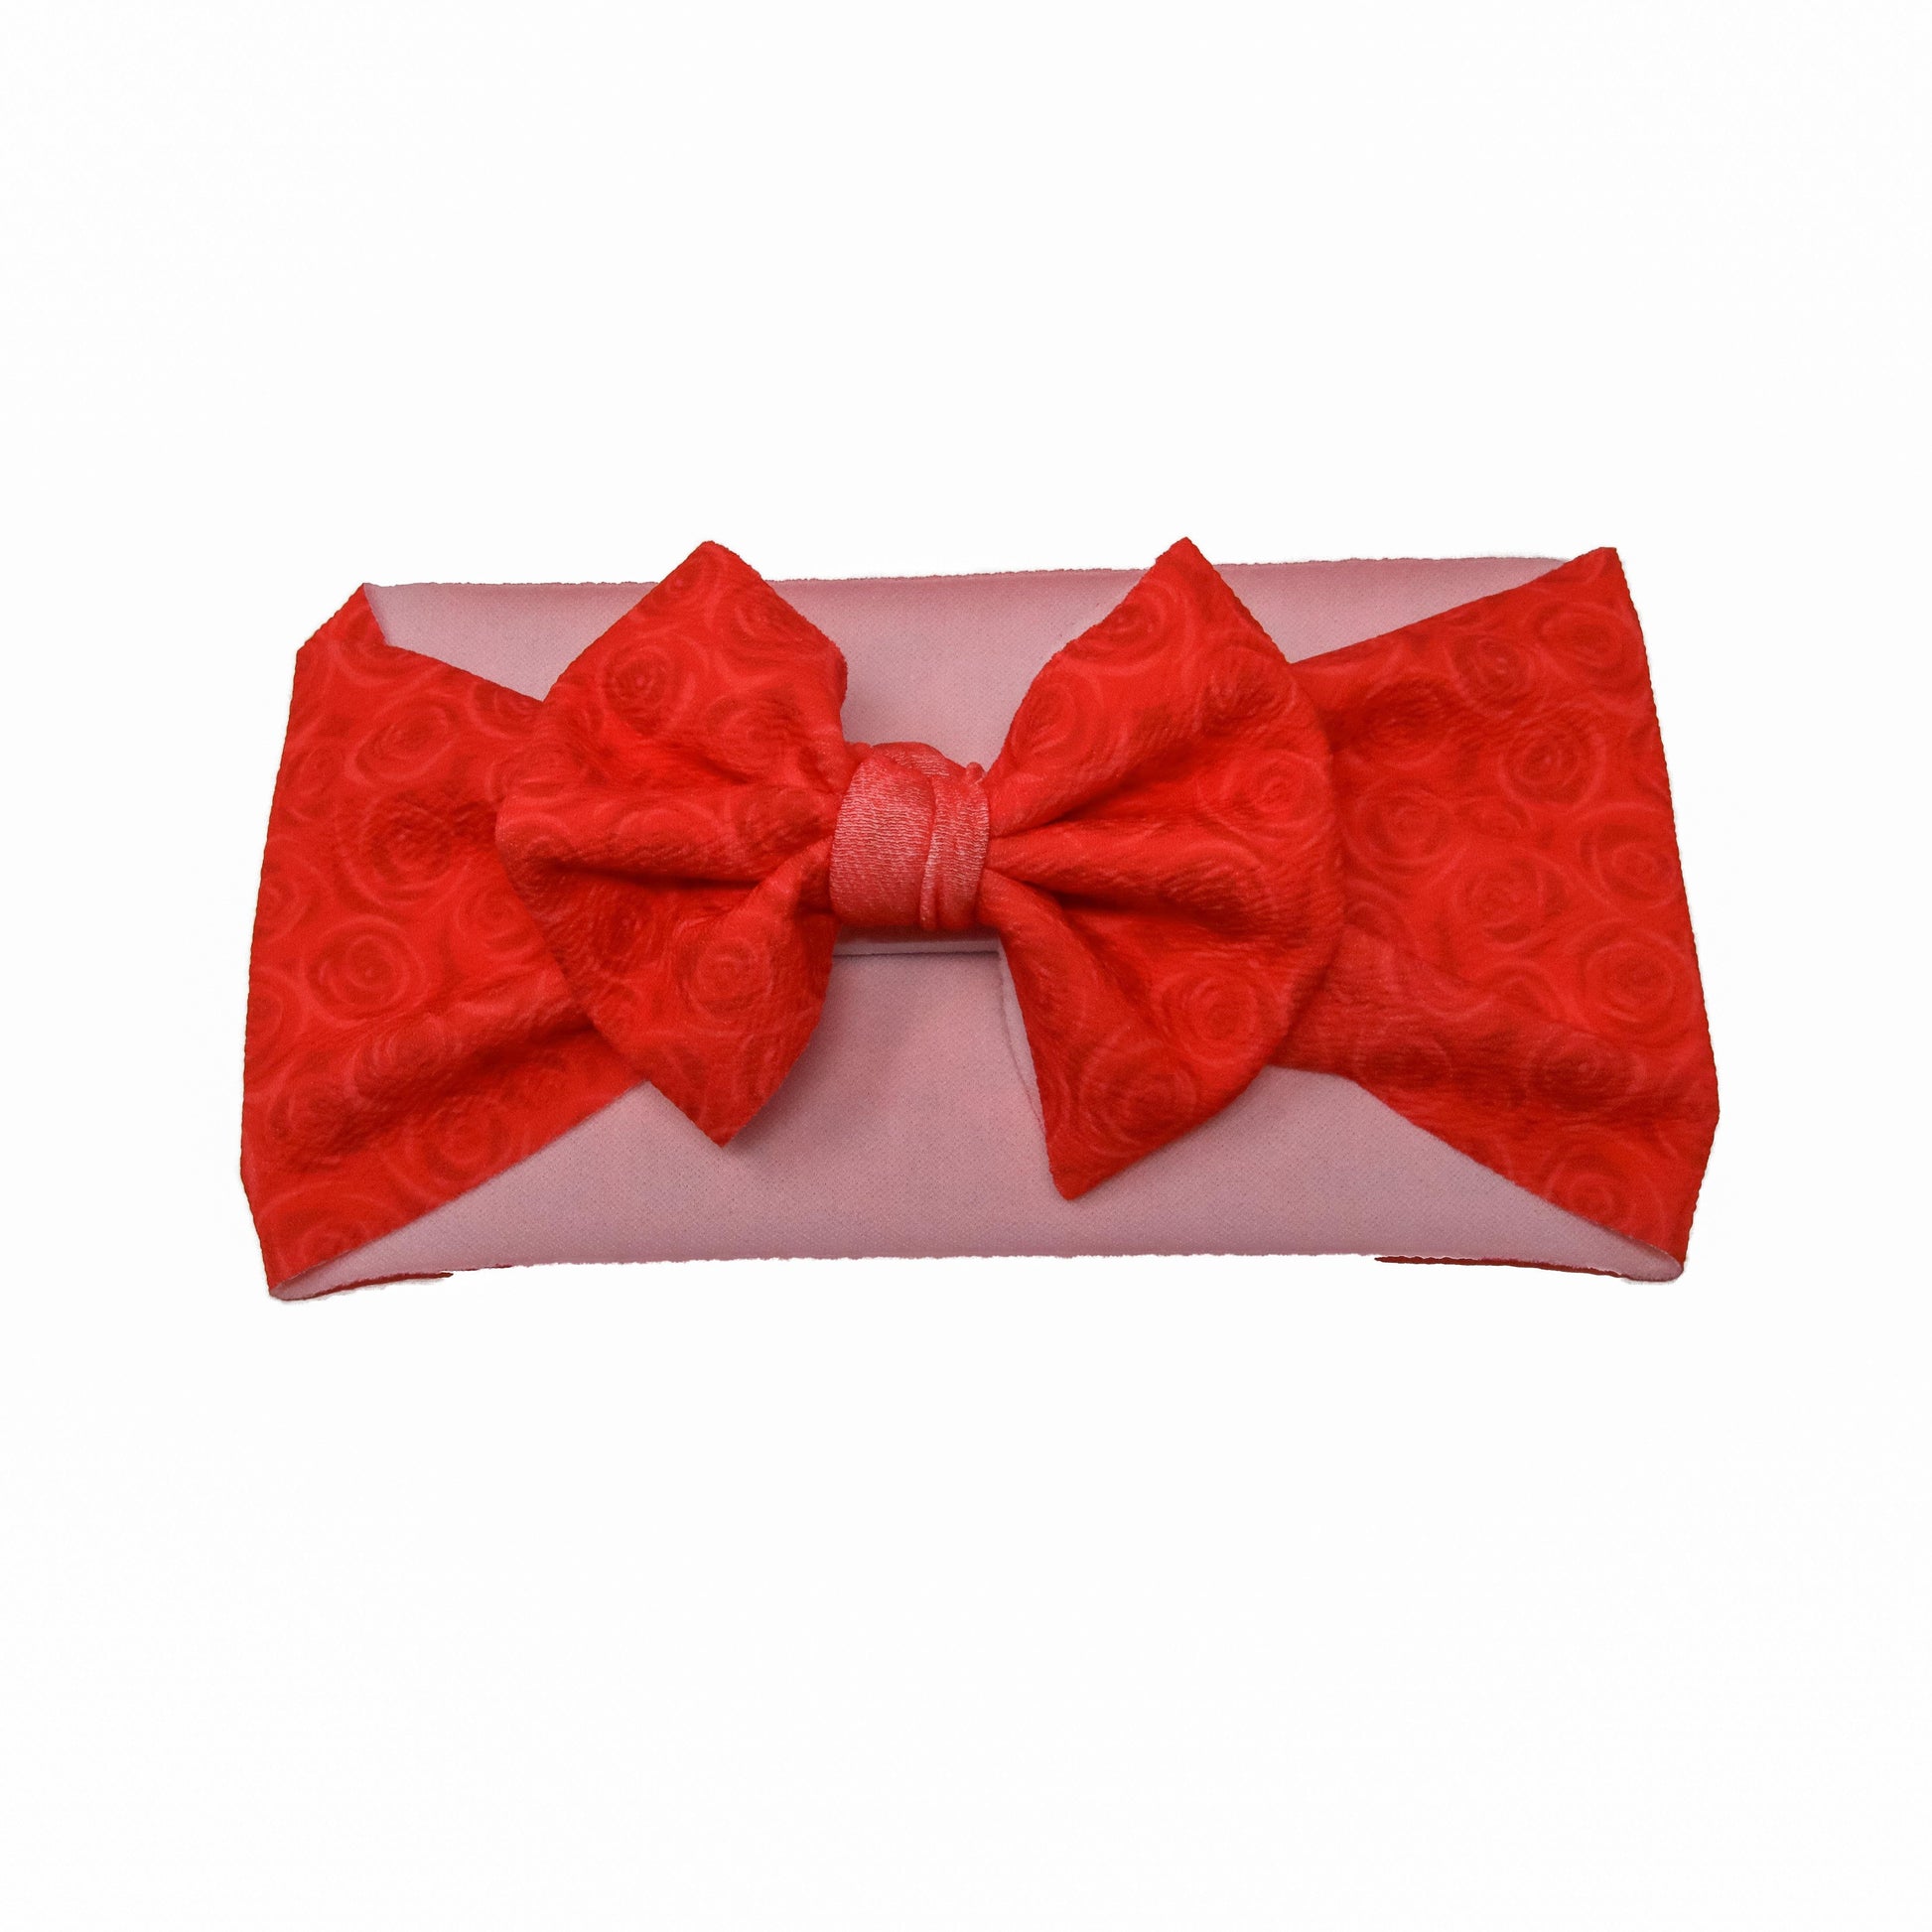 Red Roses Fabric Bow Headwrap 5"